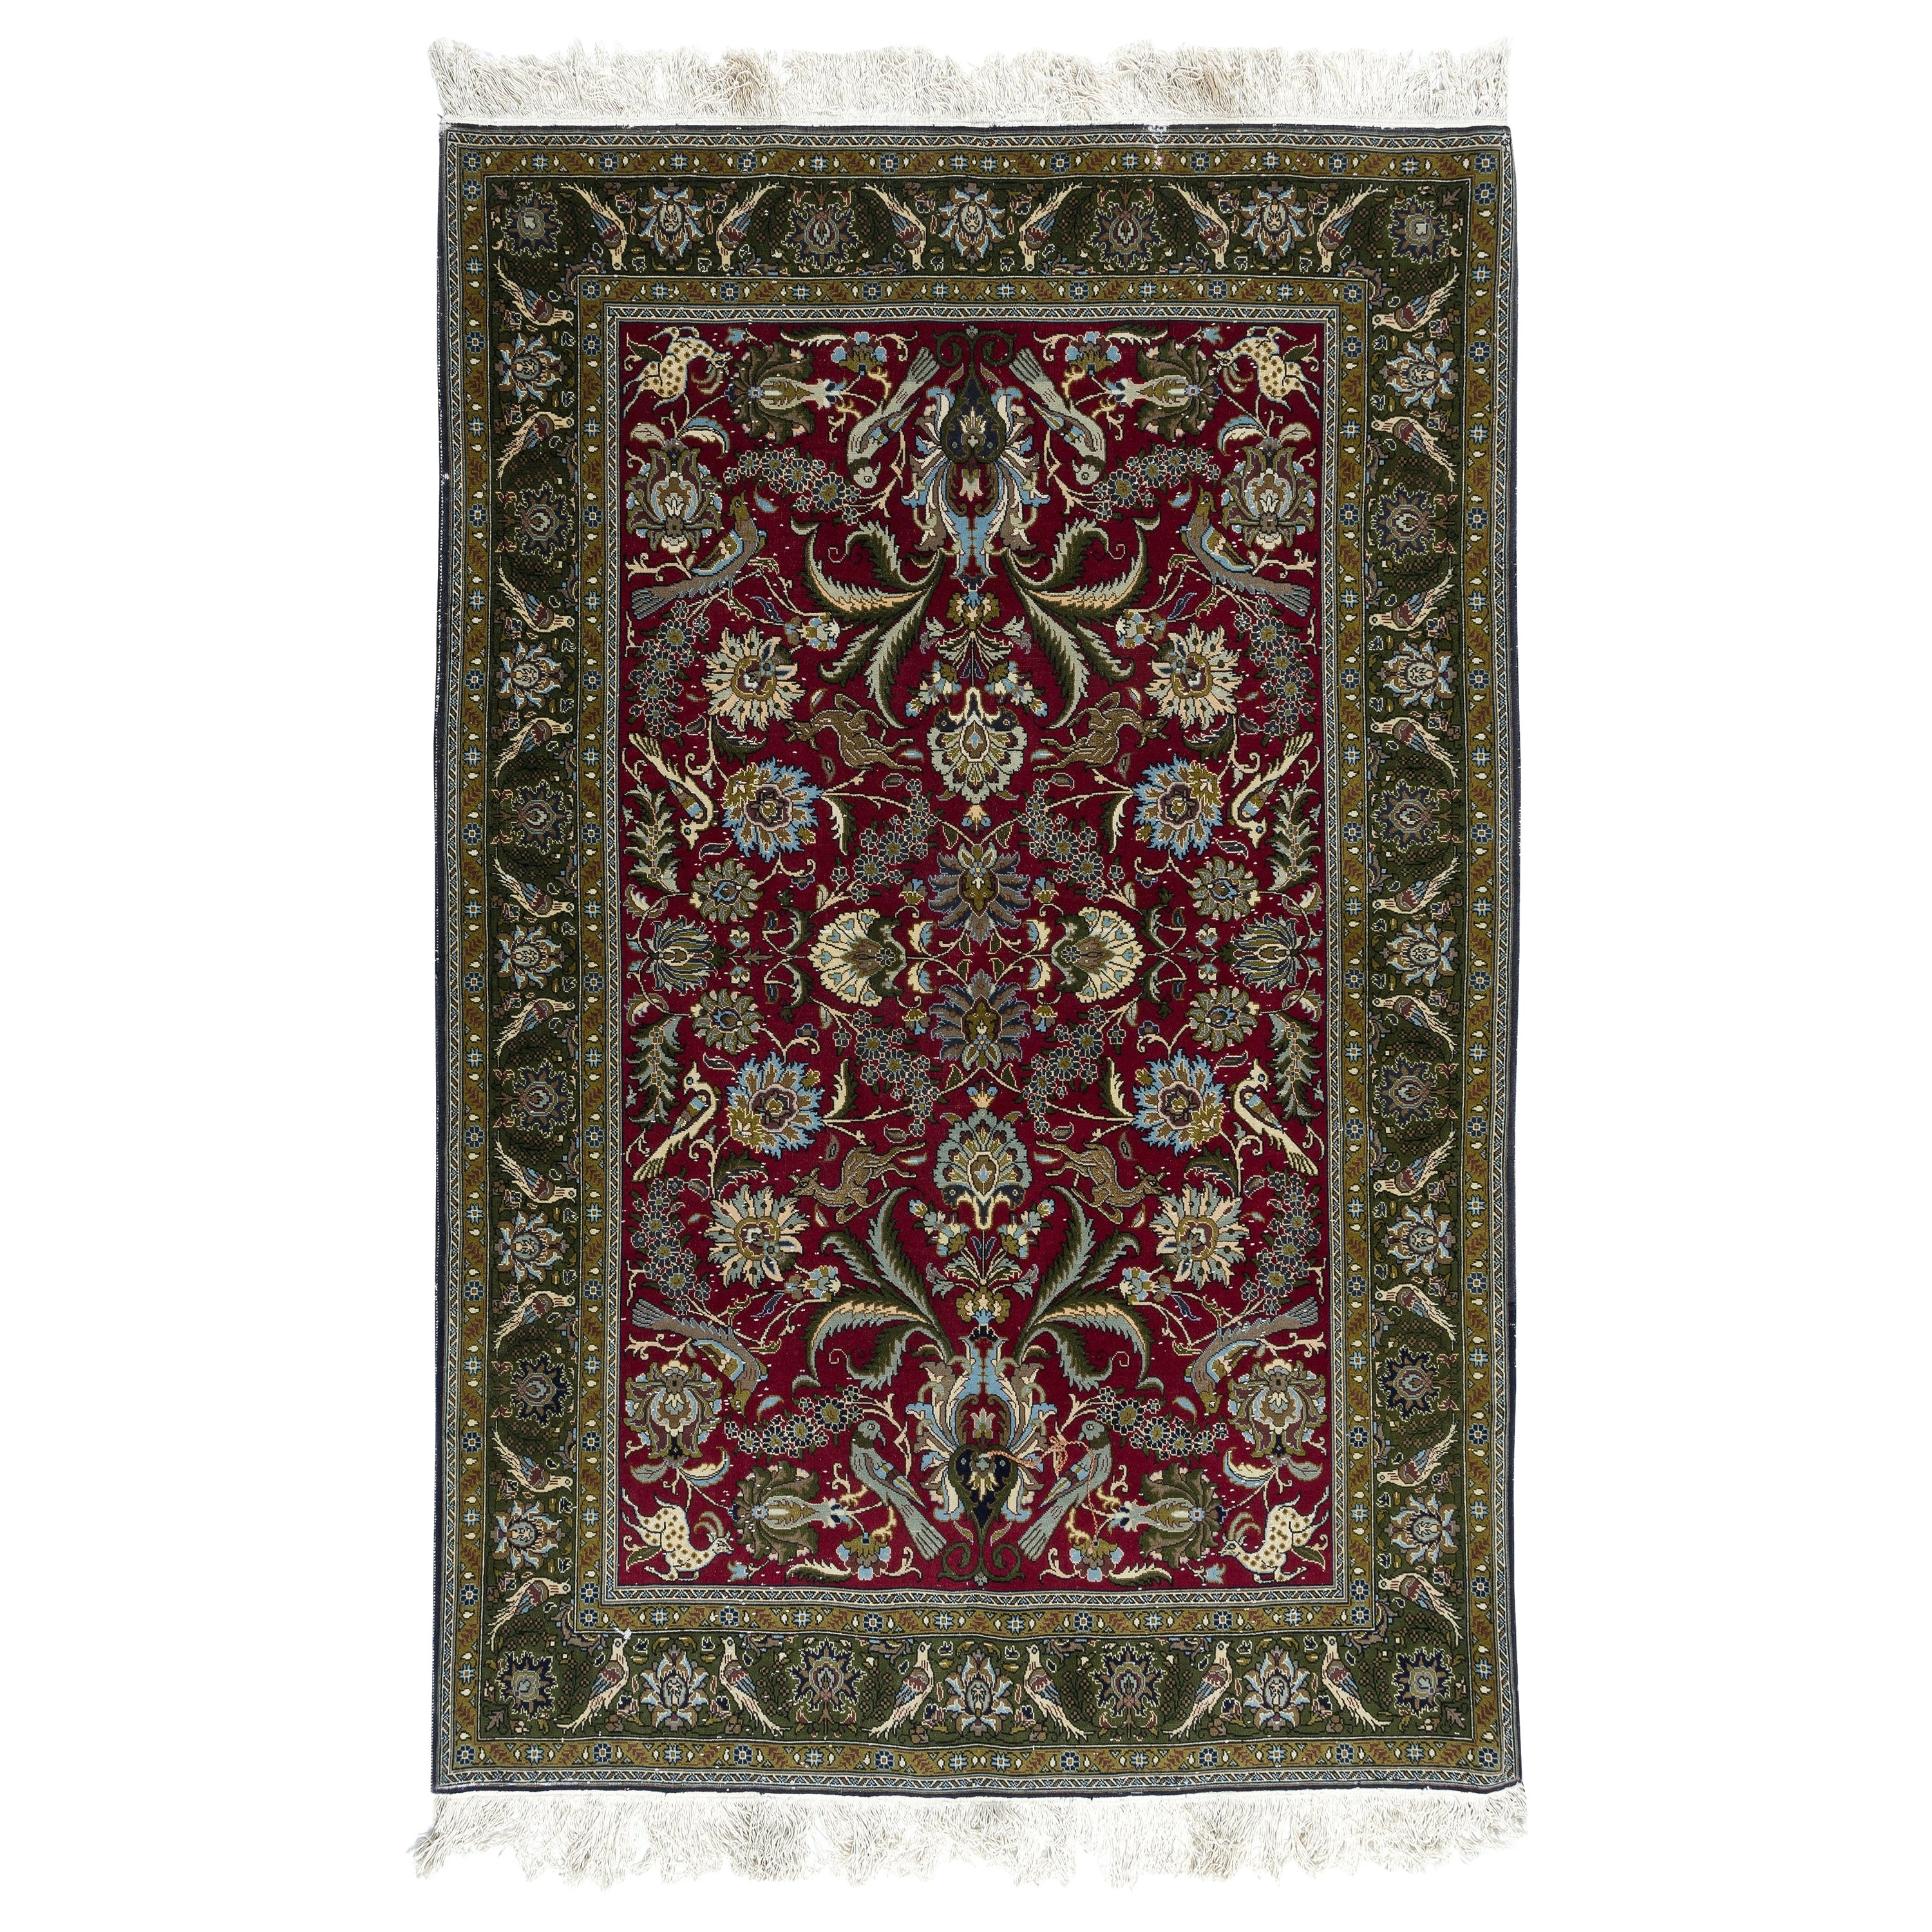 4.6x7 Ft Hand Knotted Turkish Rug in Red & Green with Floral Botanical Design For Sale